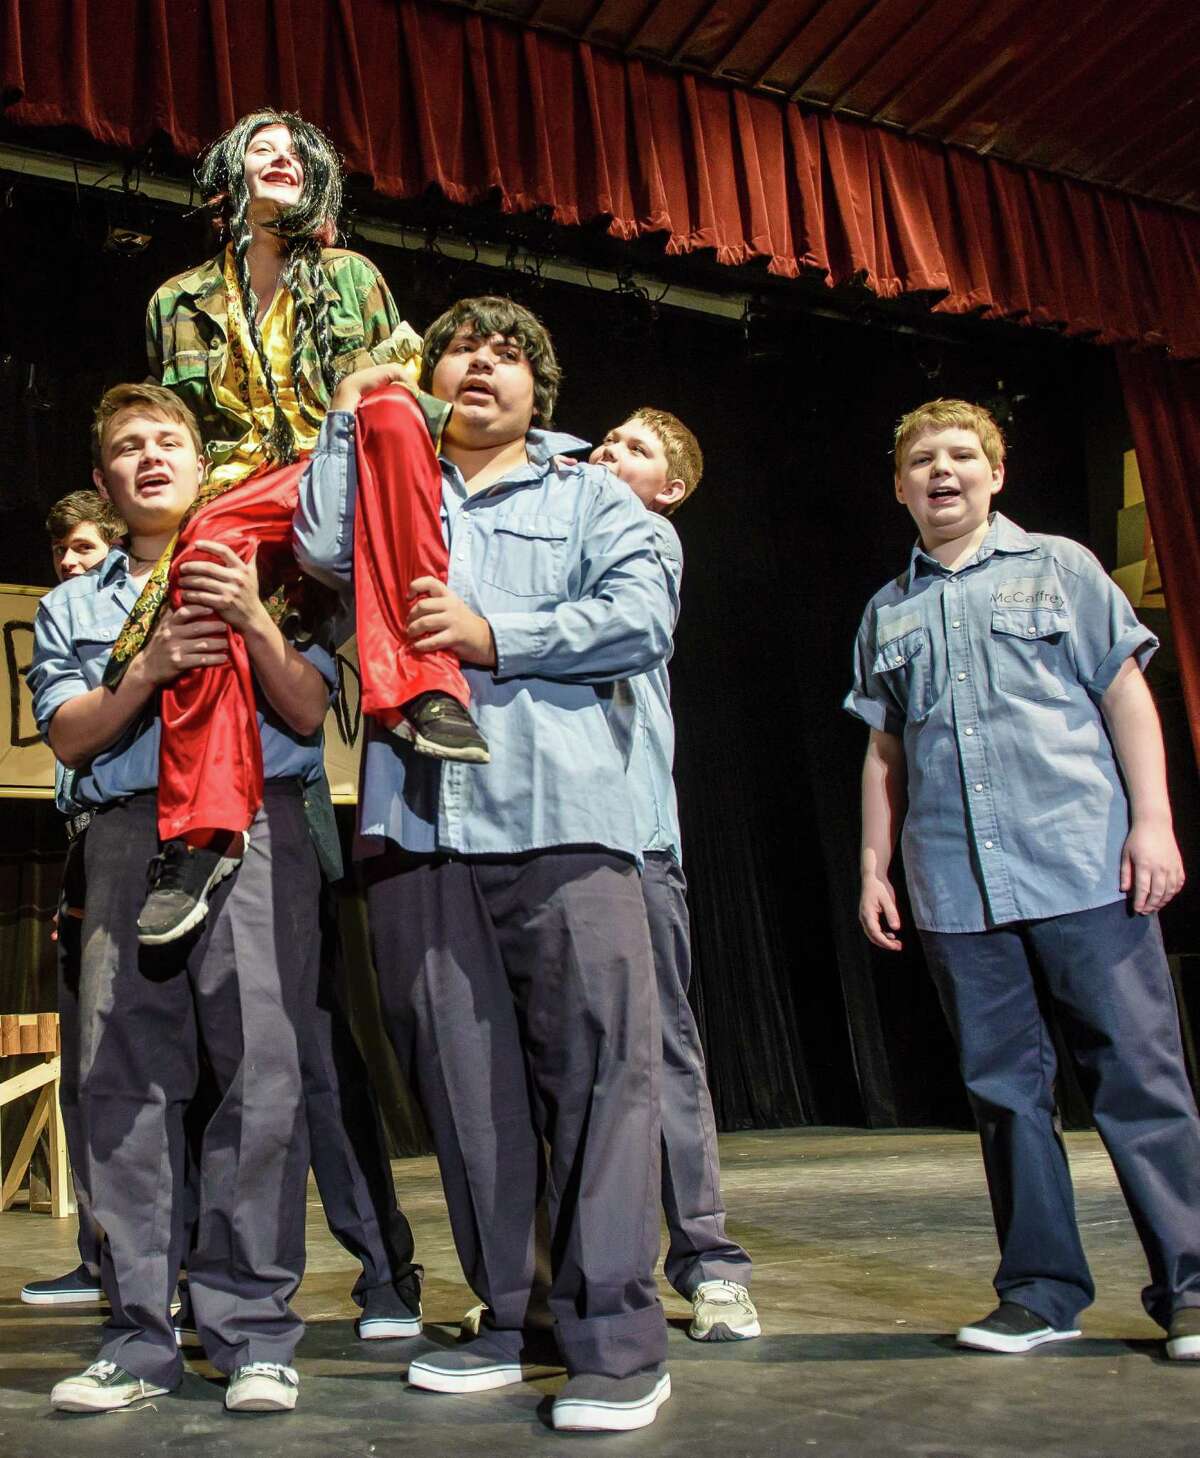 Kaylie Law, 15, portrays "Bloody Mary" as she rides the shoulders of Nick Rodriguez, 17, left, and Fernando Escalera, 15, as Christopher Morris, 15 and Grant Geiman, 14 sing along during rehearsal for "South Pacific."